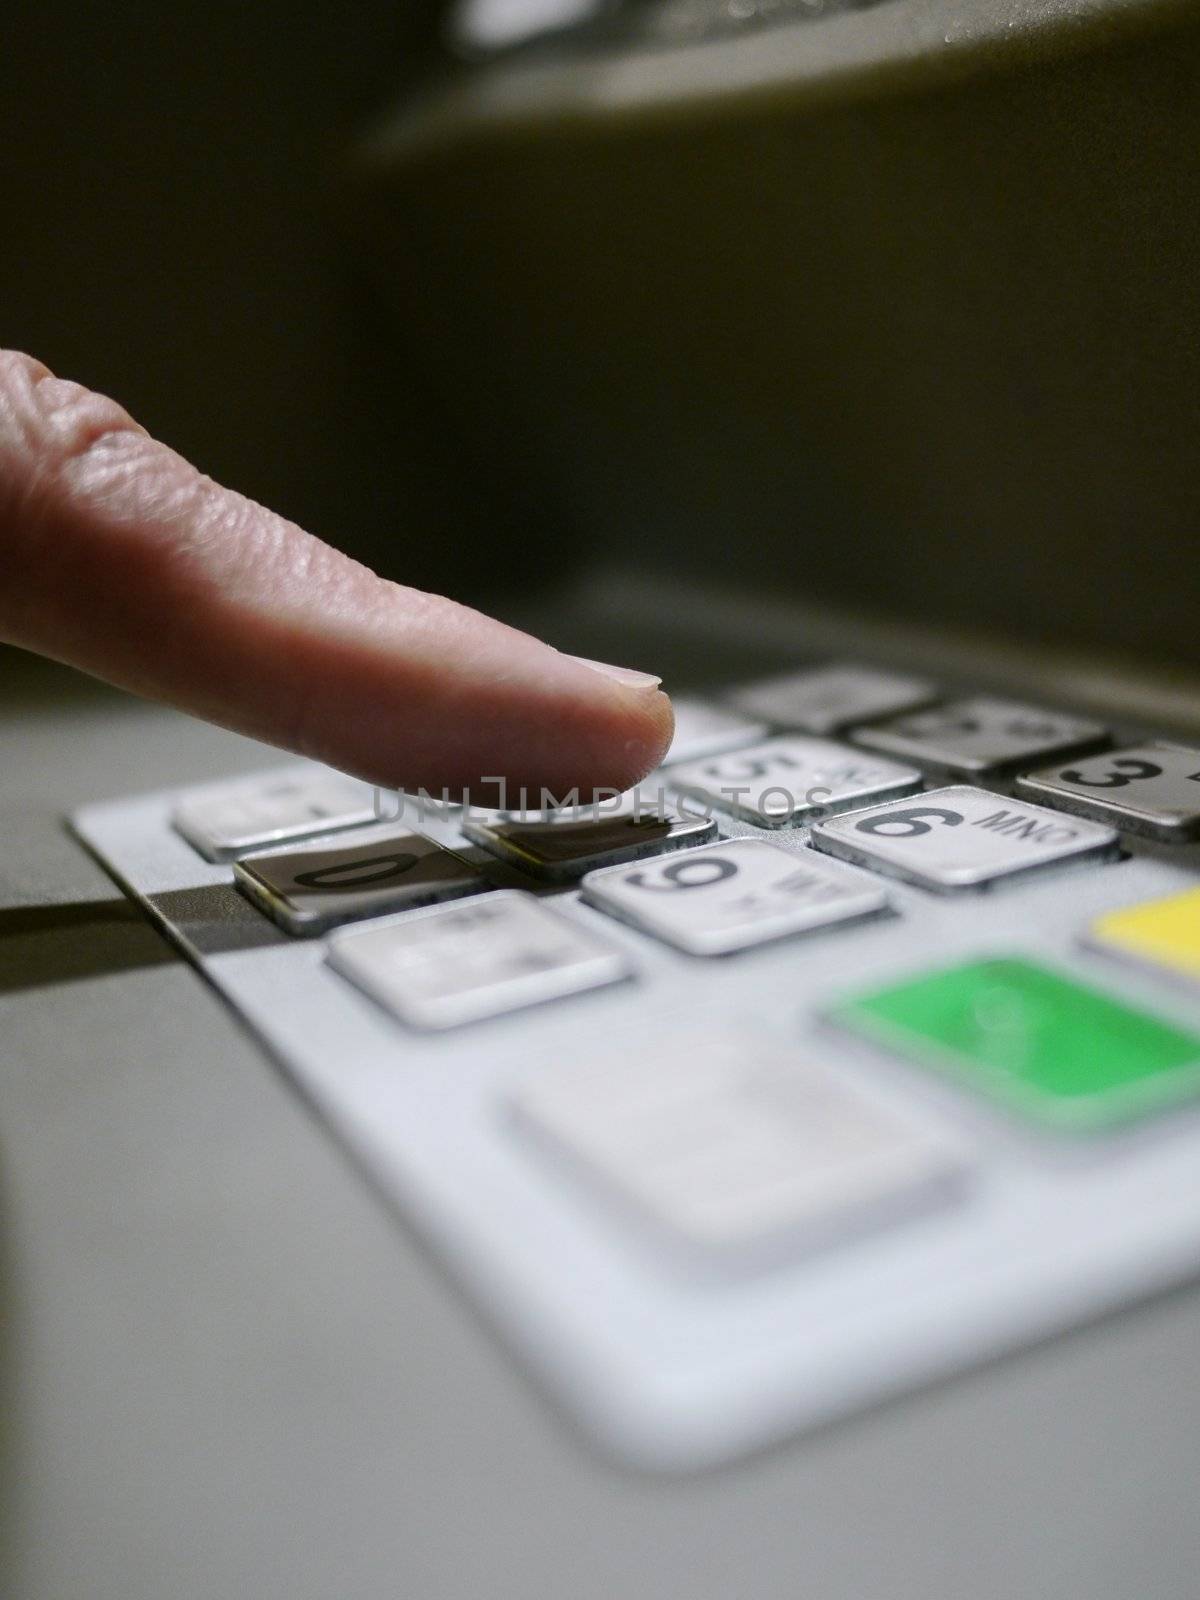 Finger using automatic teller keypad to enter pin number